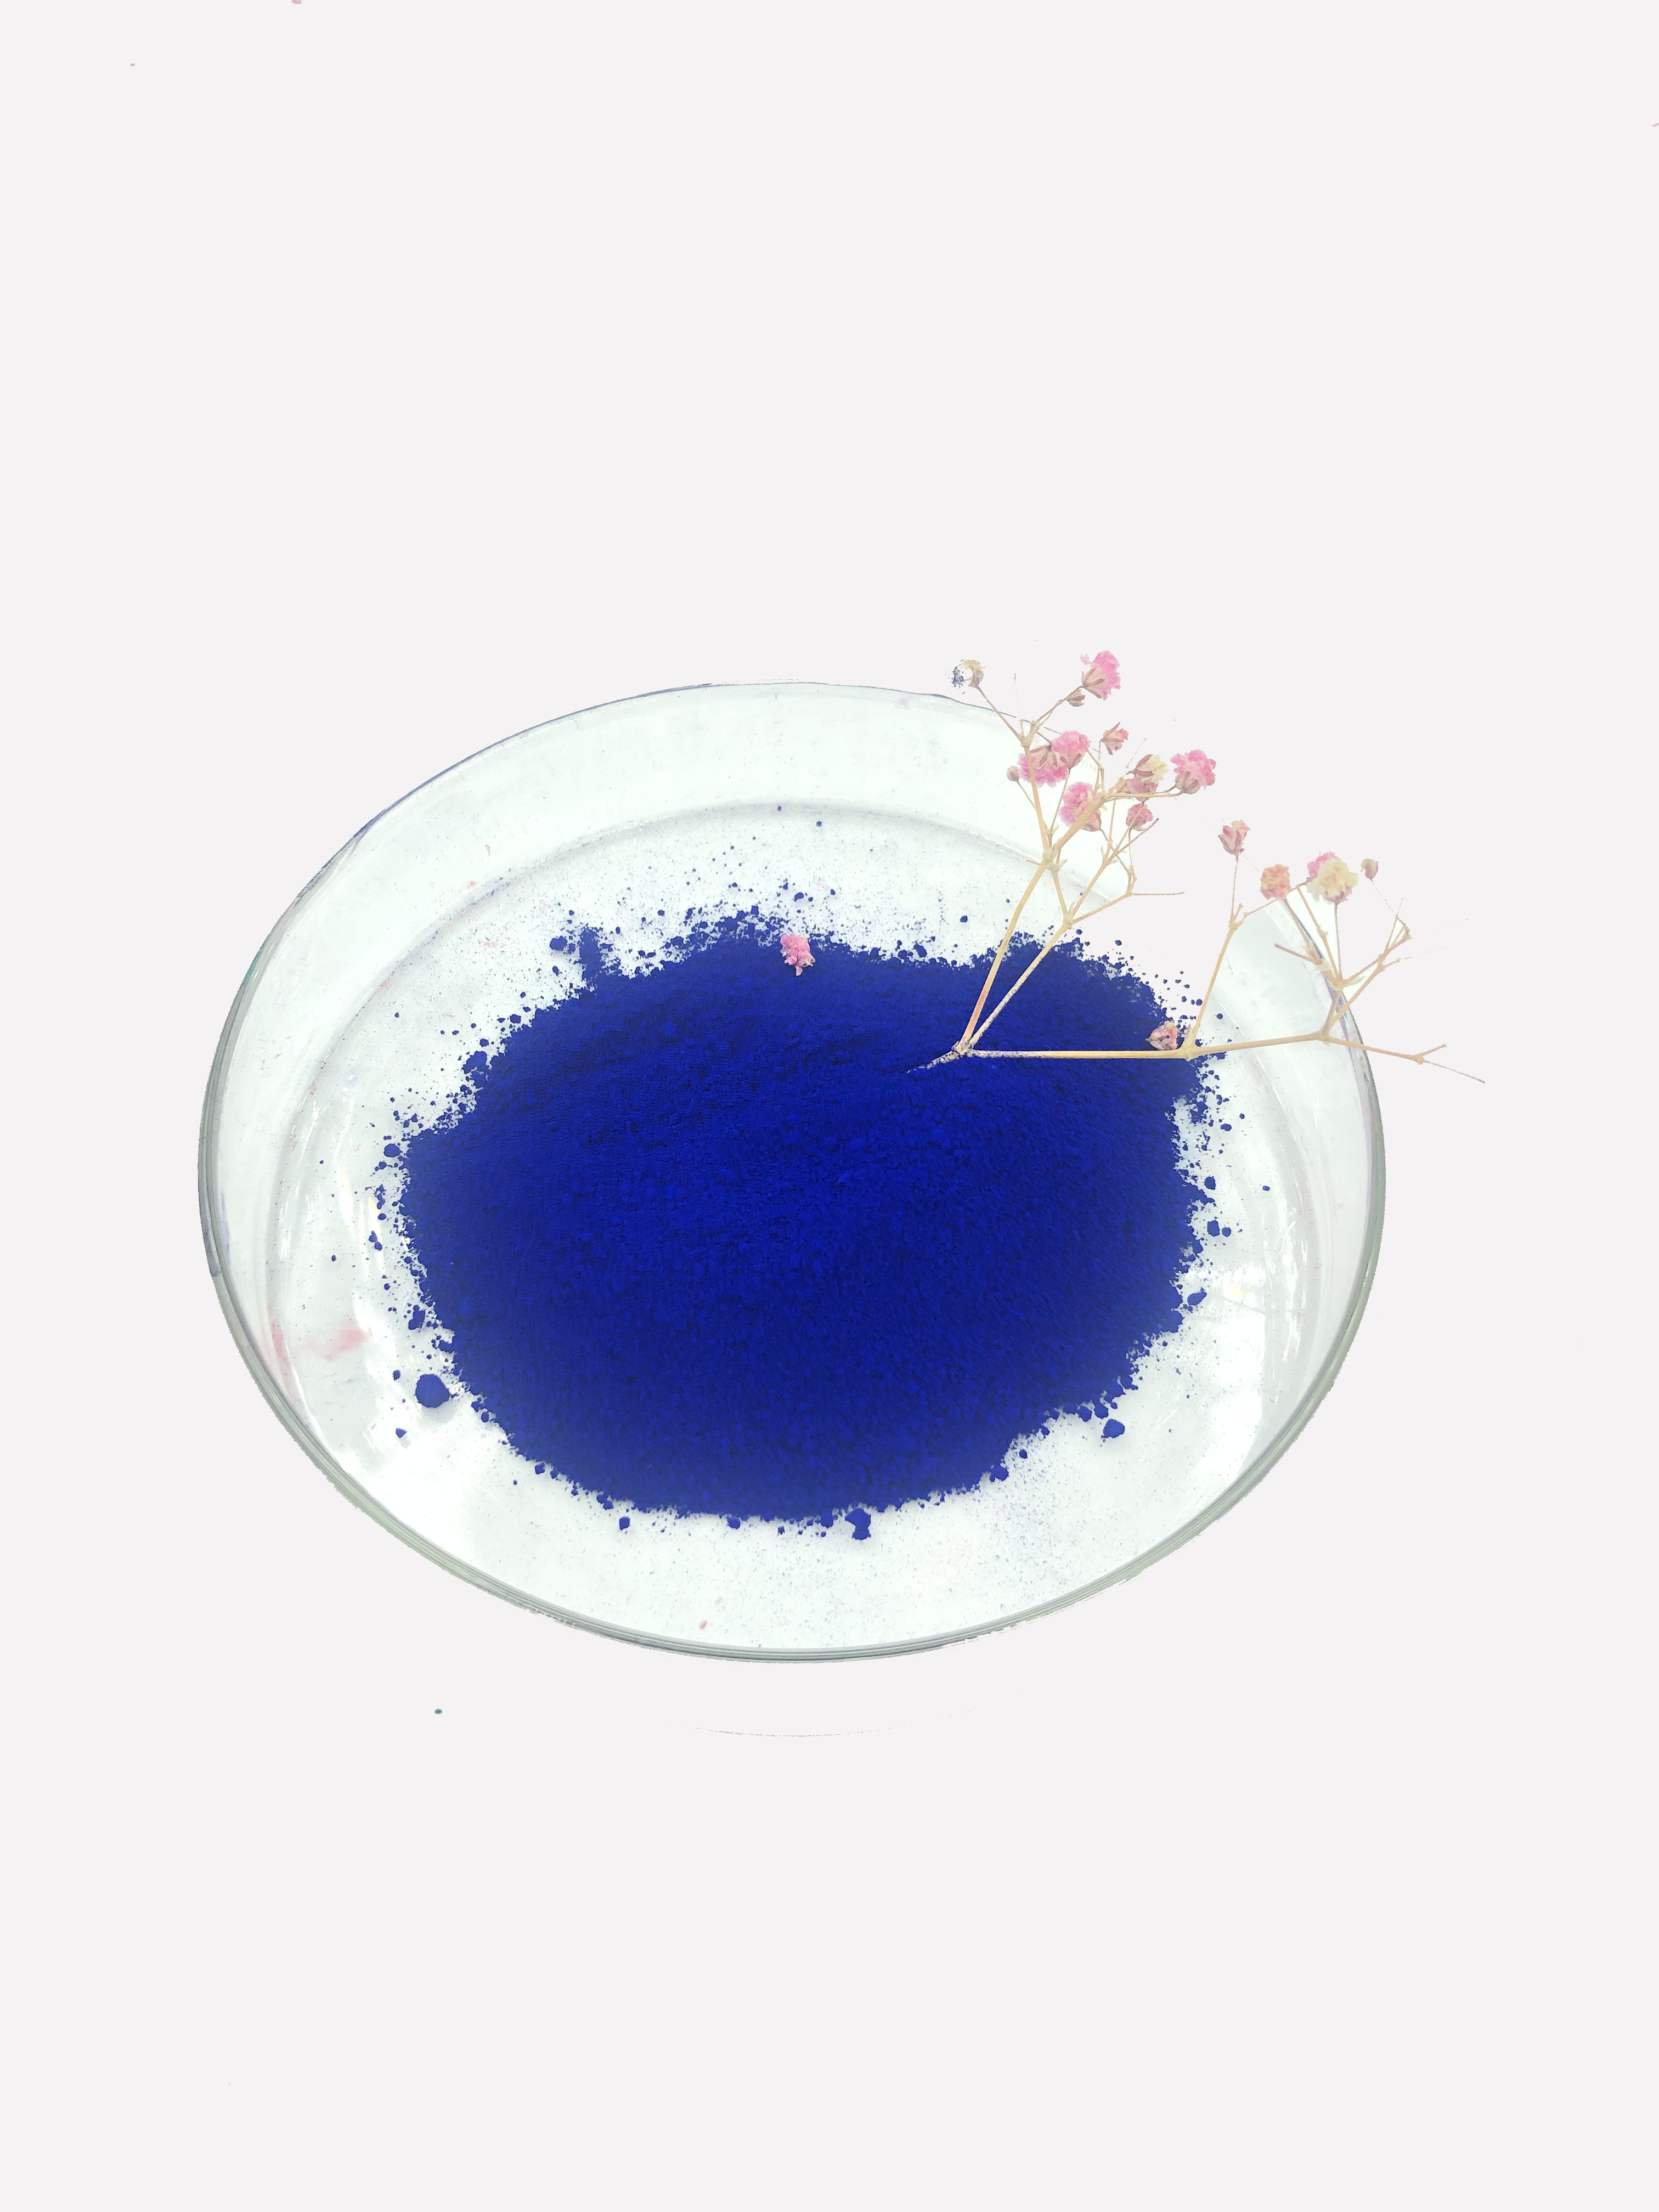 Pigment Blue 15:0 CAS 147-14-8 High Weather Resistance 100% Pure for Coating Ink And Plastic 